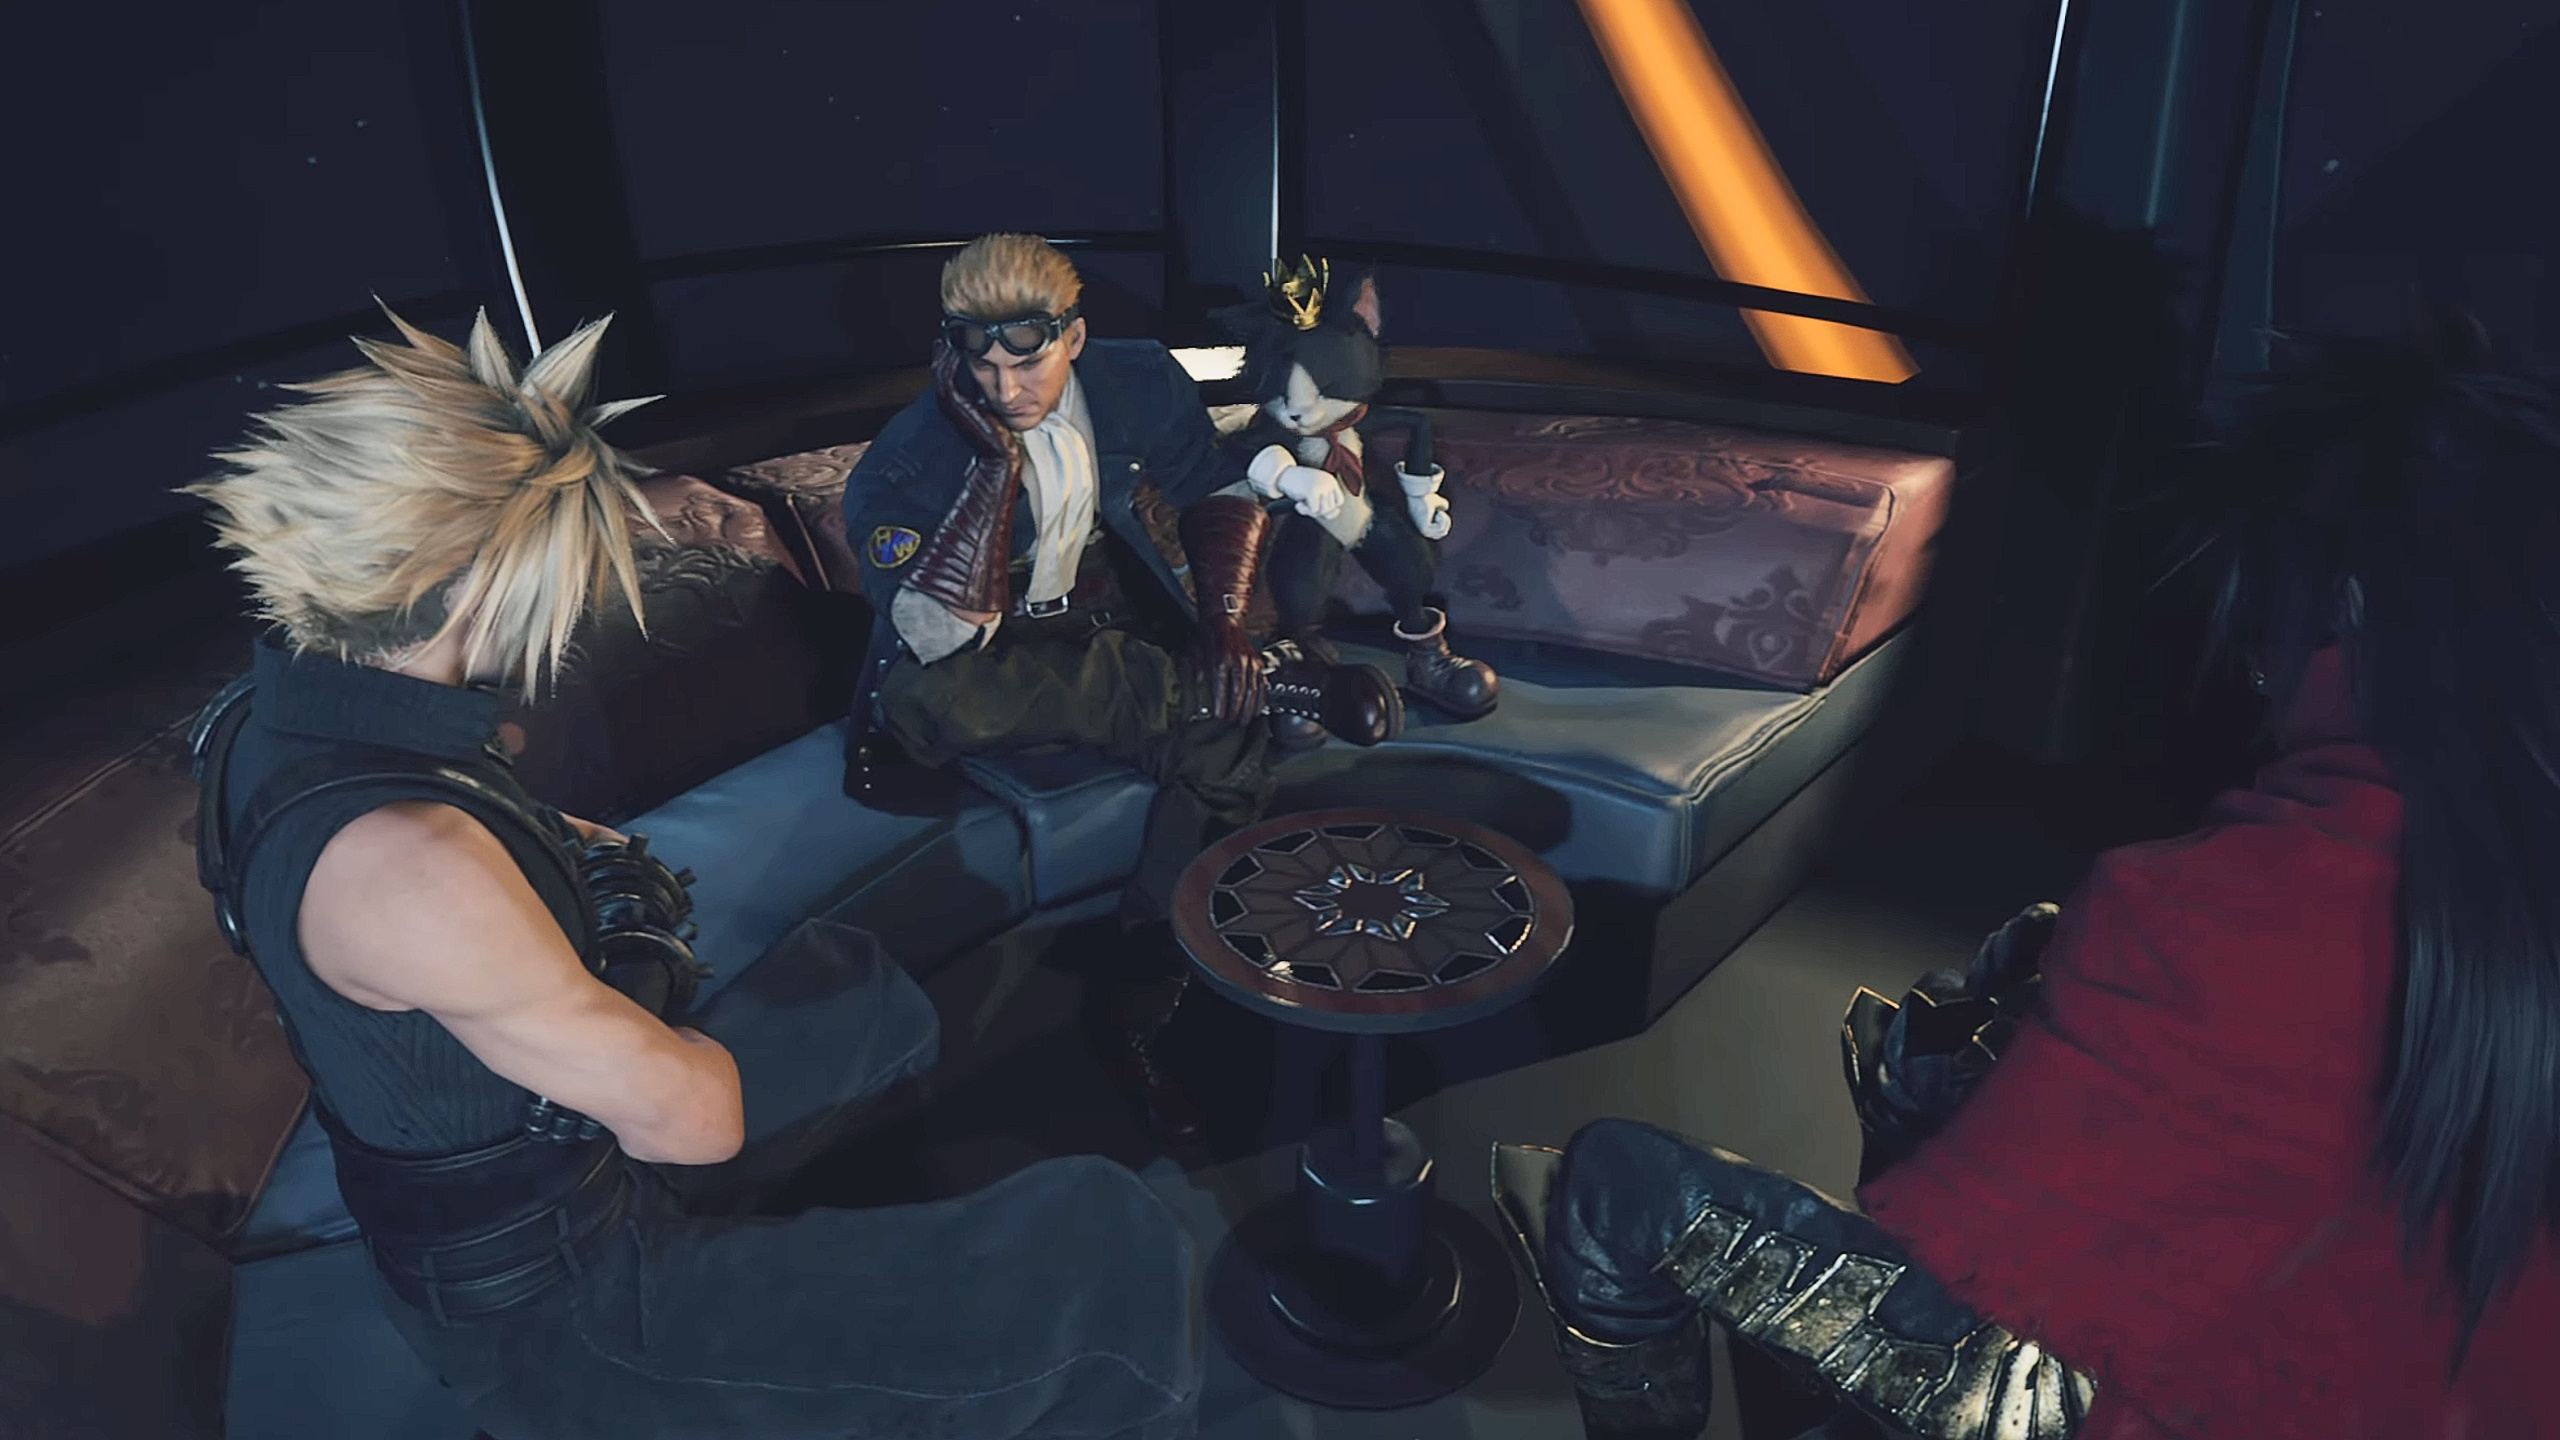 FF7 Rebirth's Cid, Vincent, and Cait Sith sitting quietly and dejectedly in the Gold Saucer's Ferris wheel car